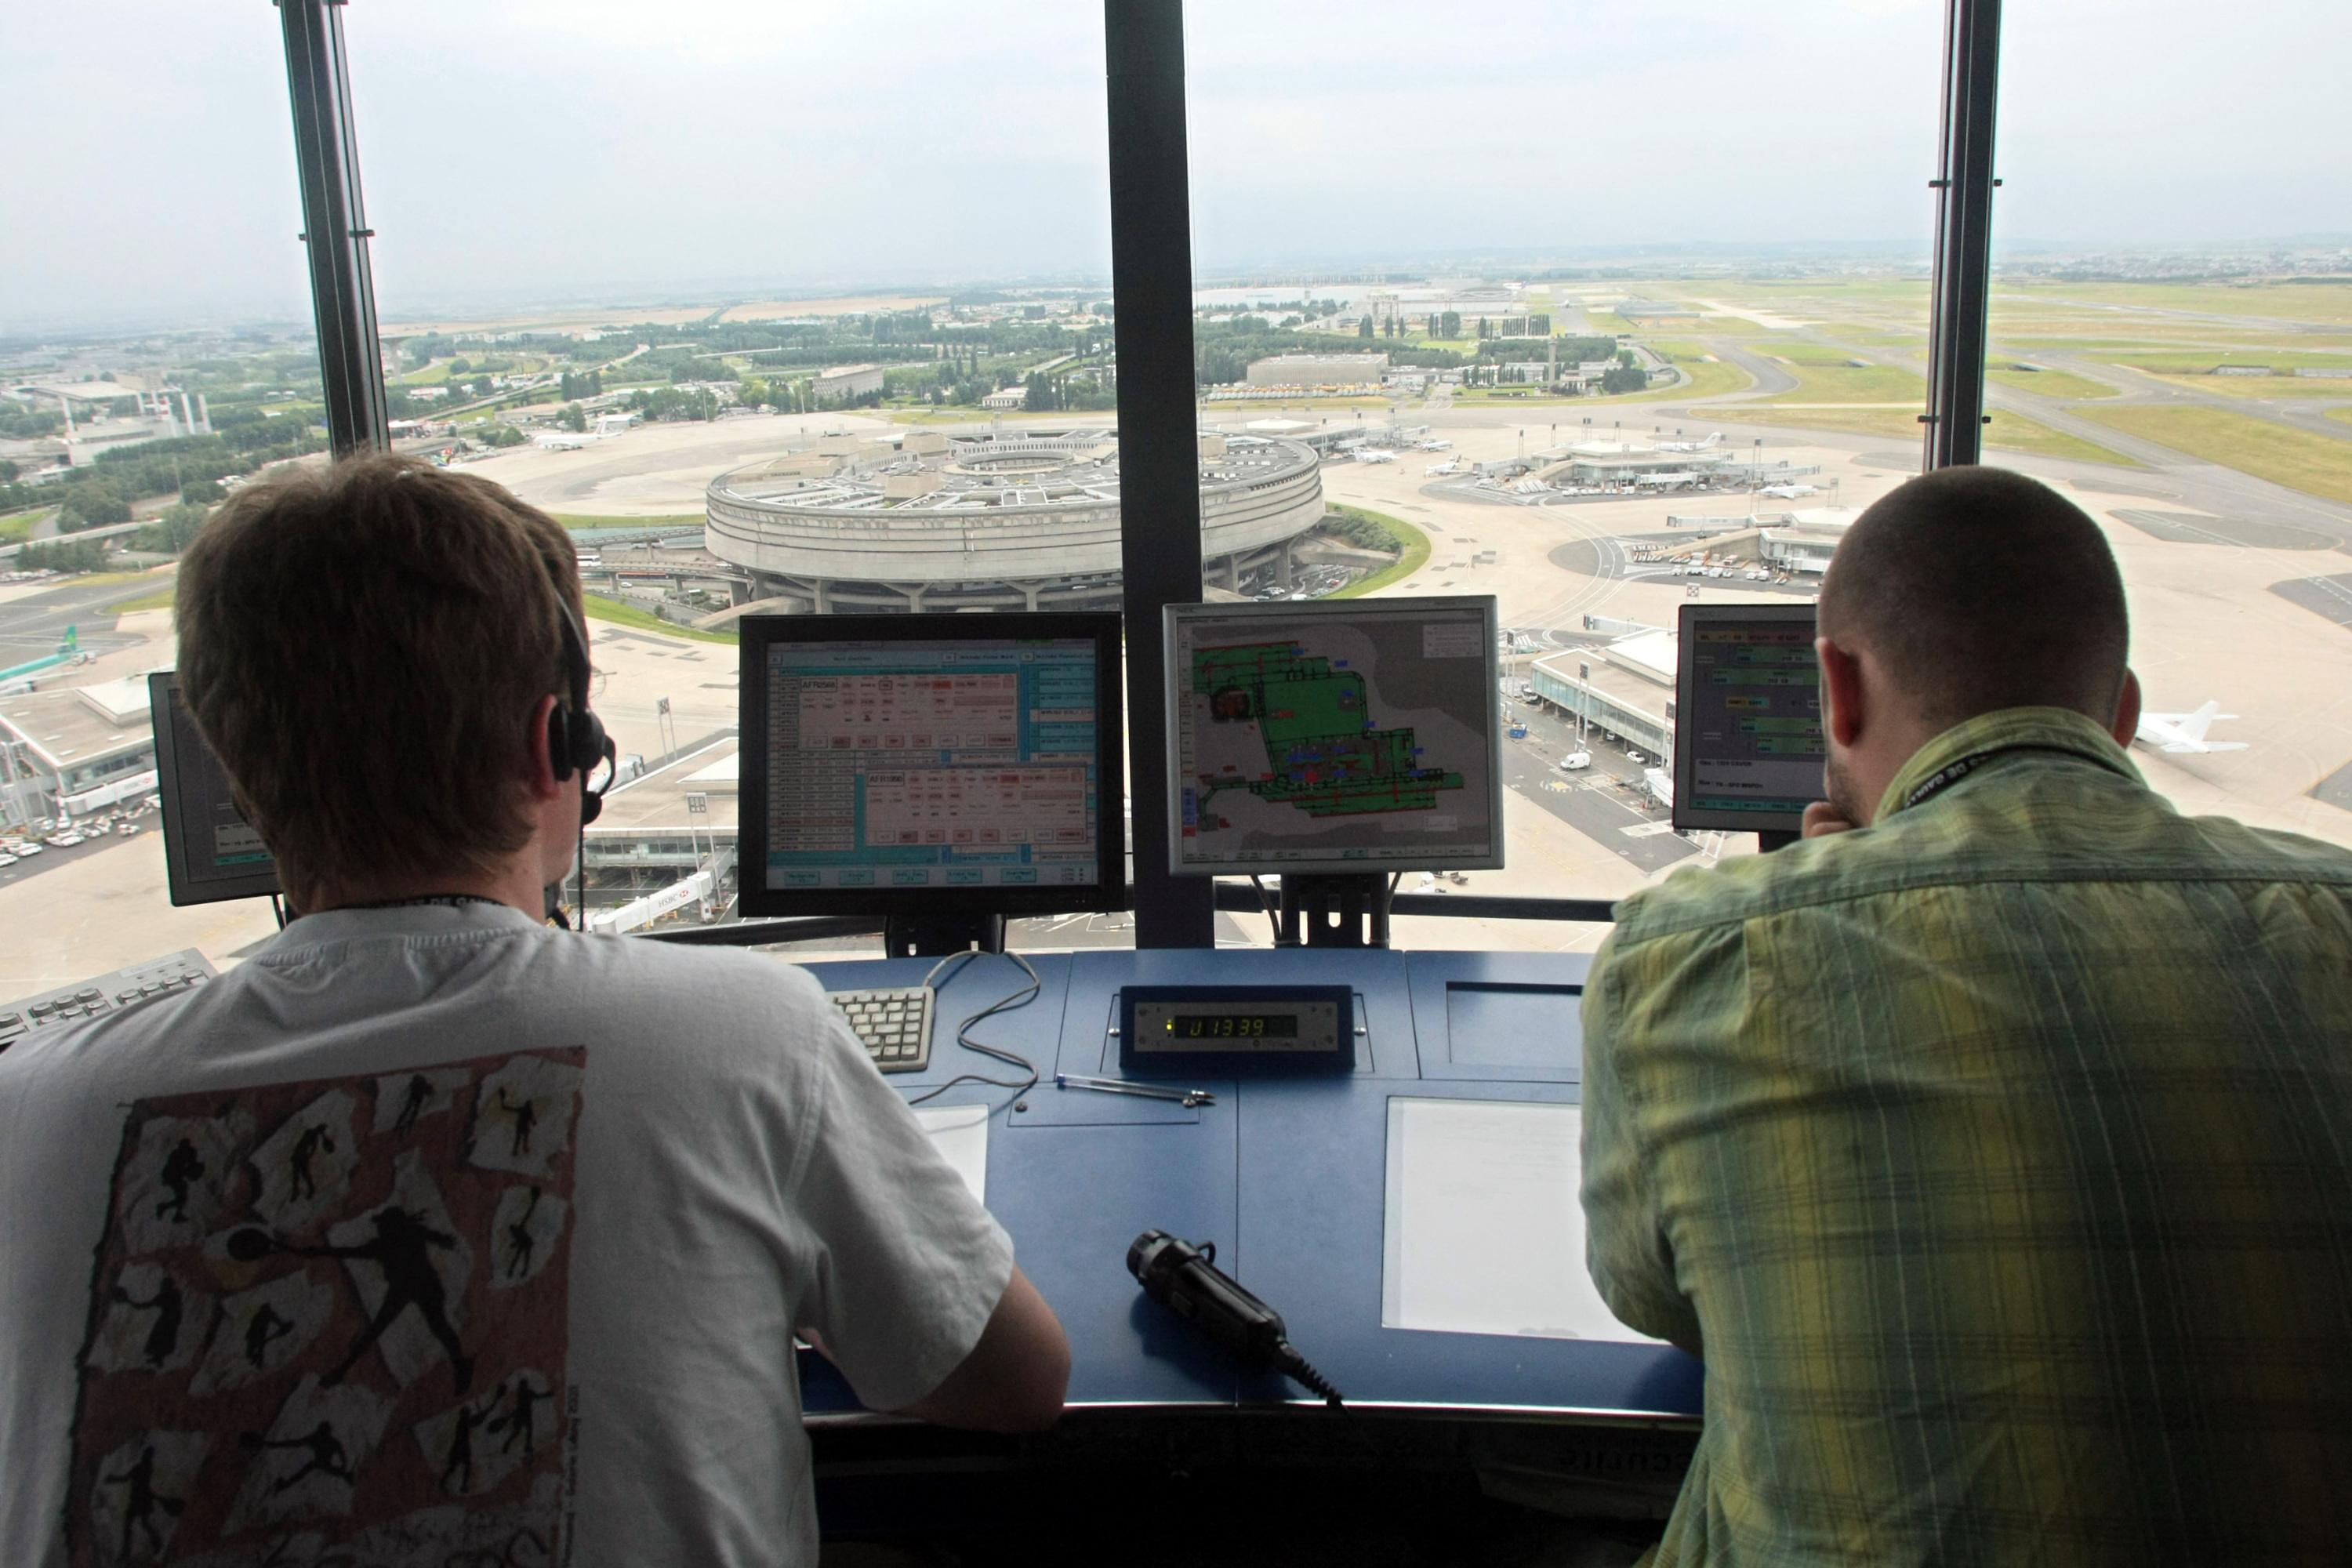 The main air traffic controllers union filed strike notice on April 25